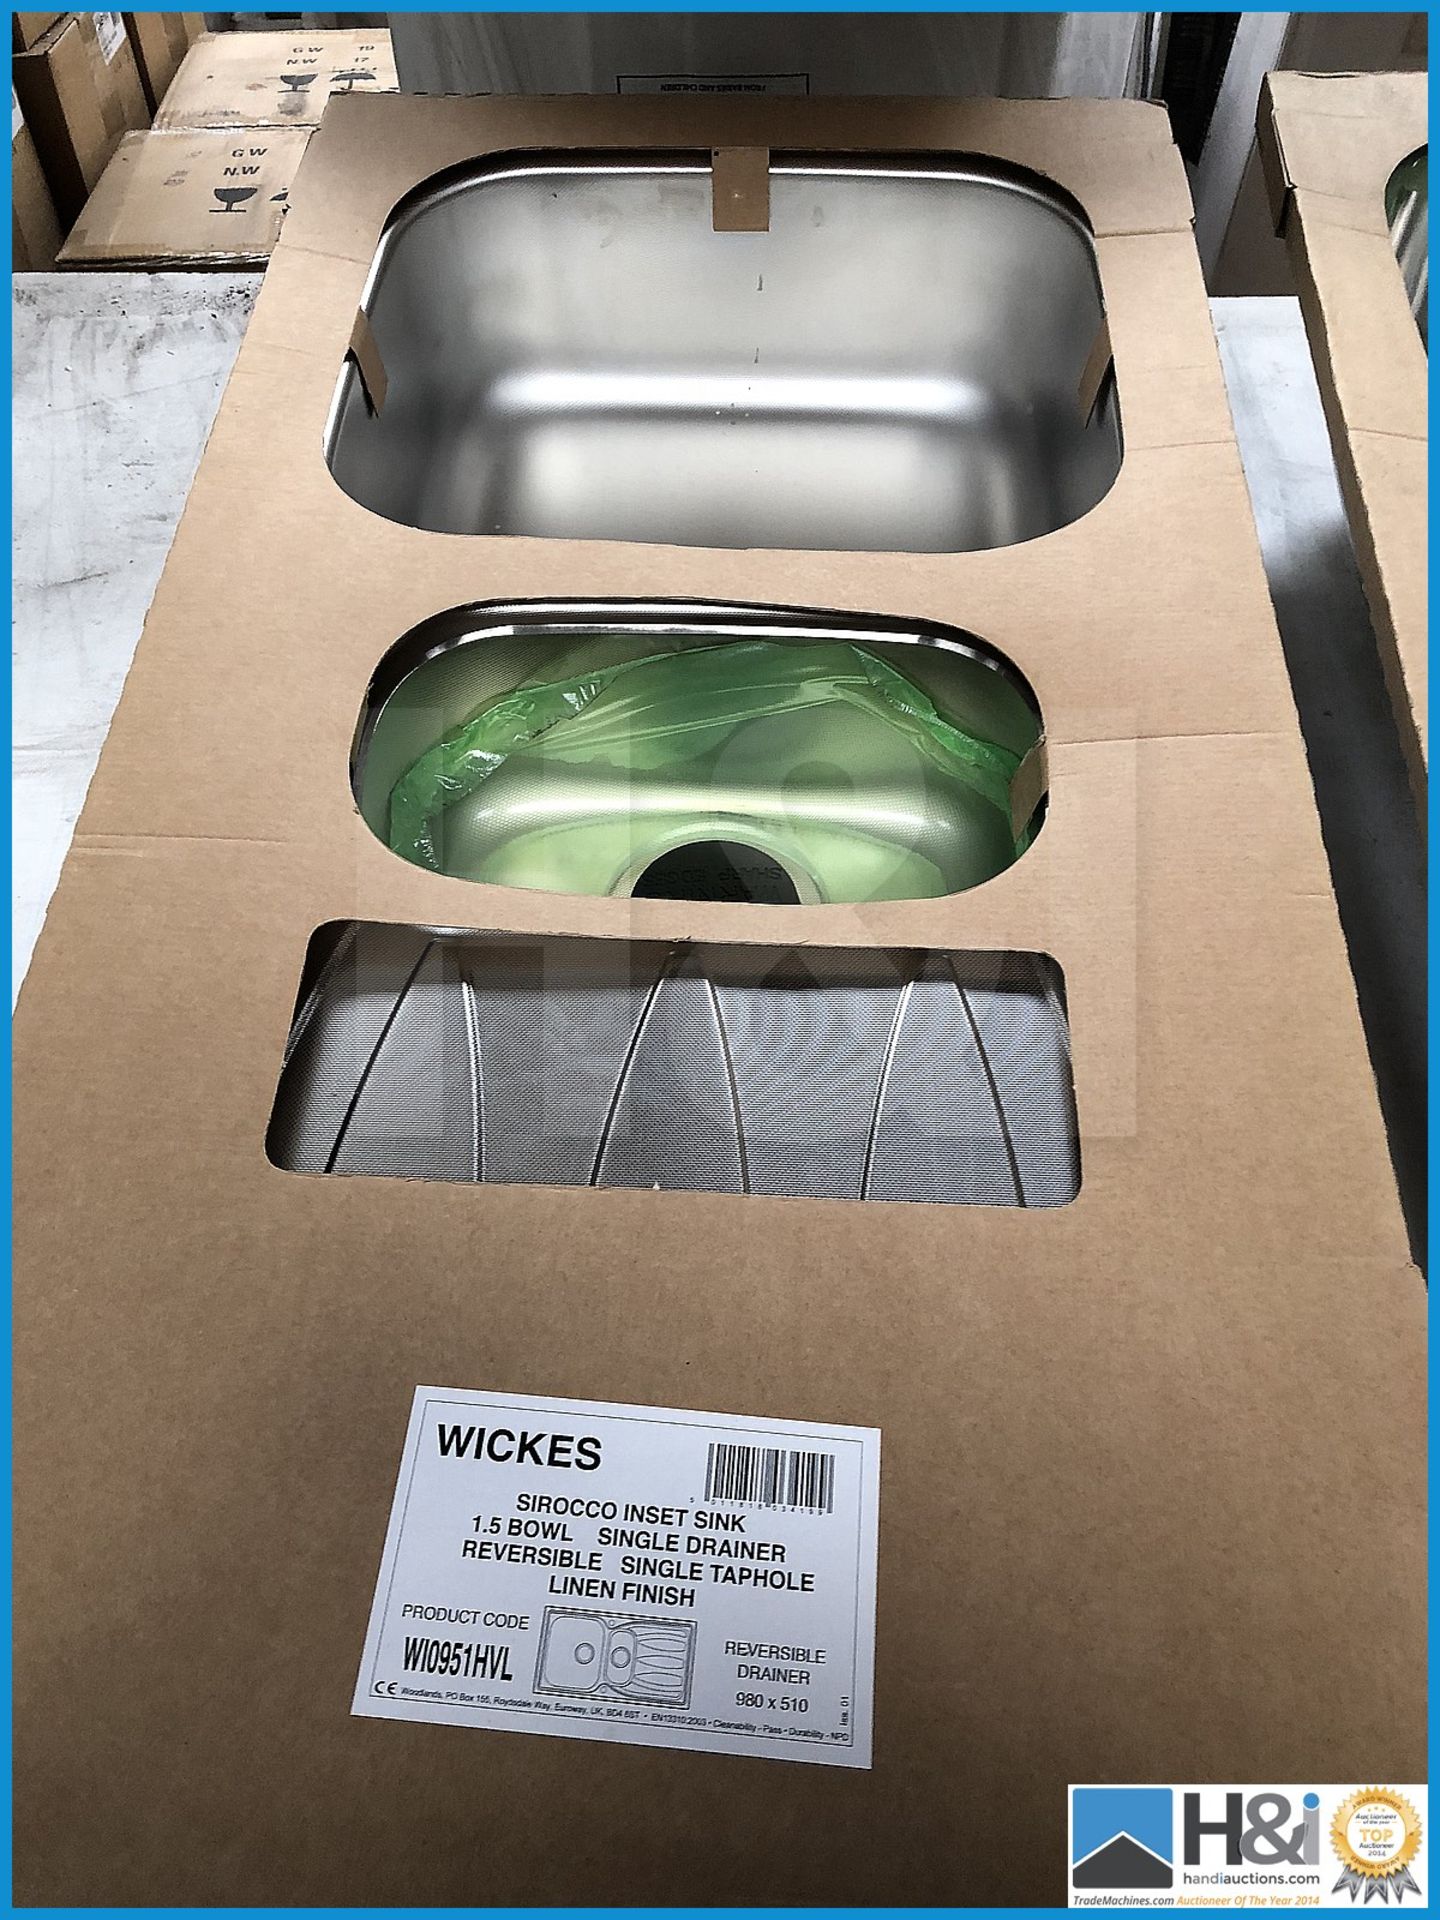 Wickes Sirocco insert sink 1.5 bowl single drainer reversible single tap hole stainless linen textur